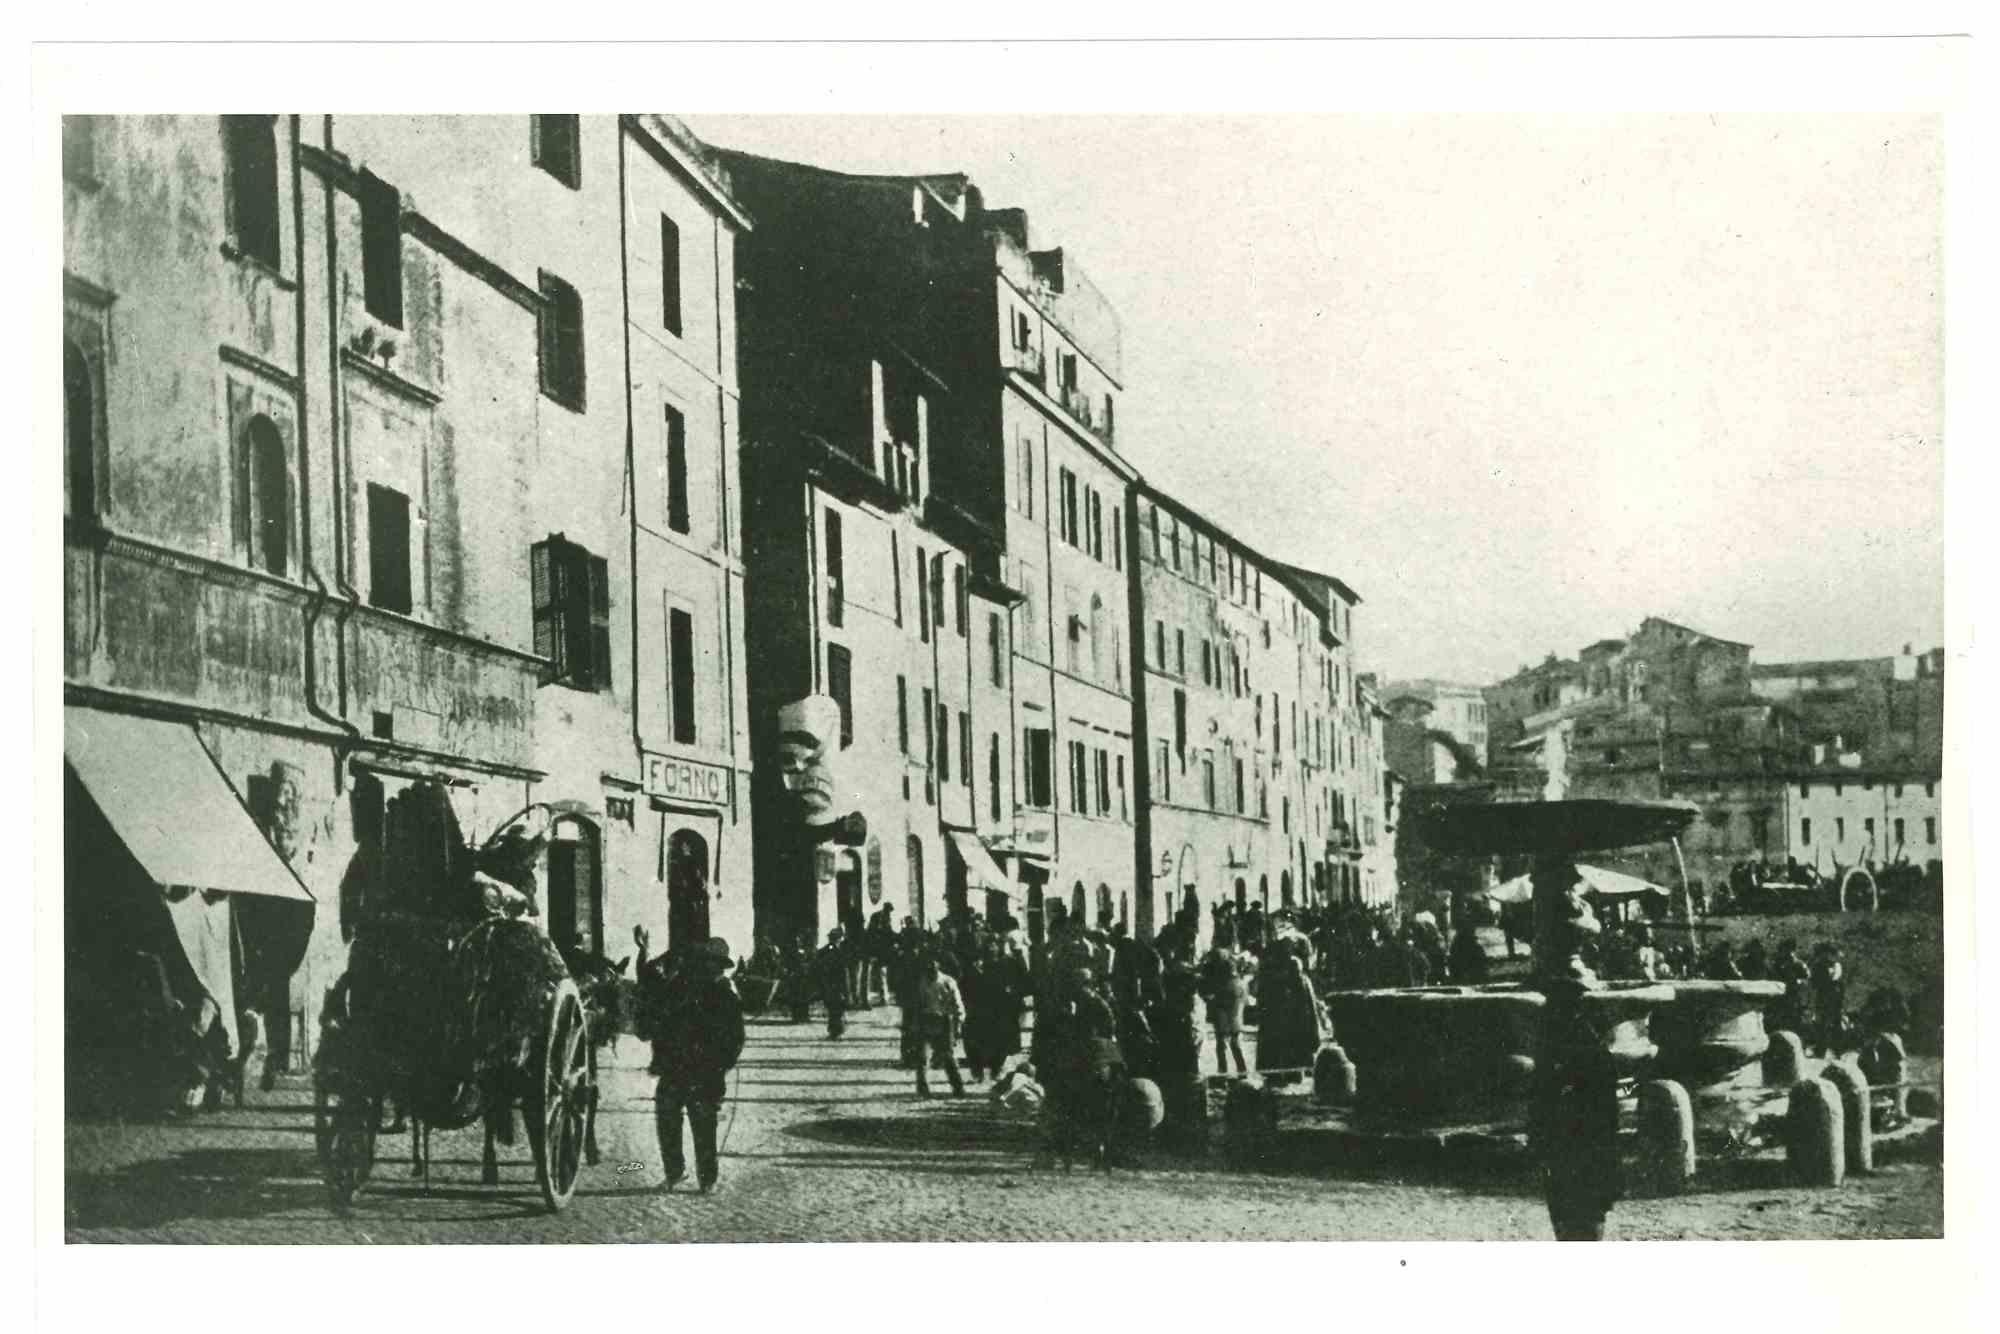 Unknown Landscape Photograph - View Of Rome - Vintage Photograph - Early 20th Century